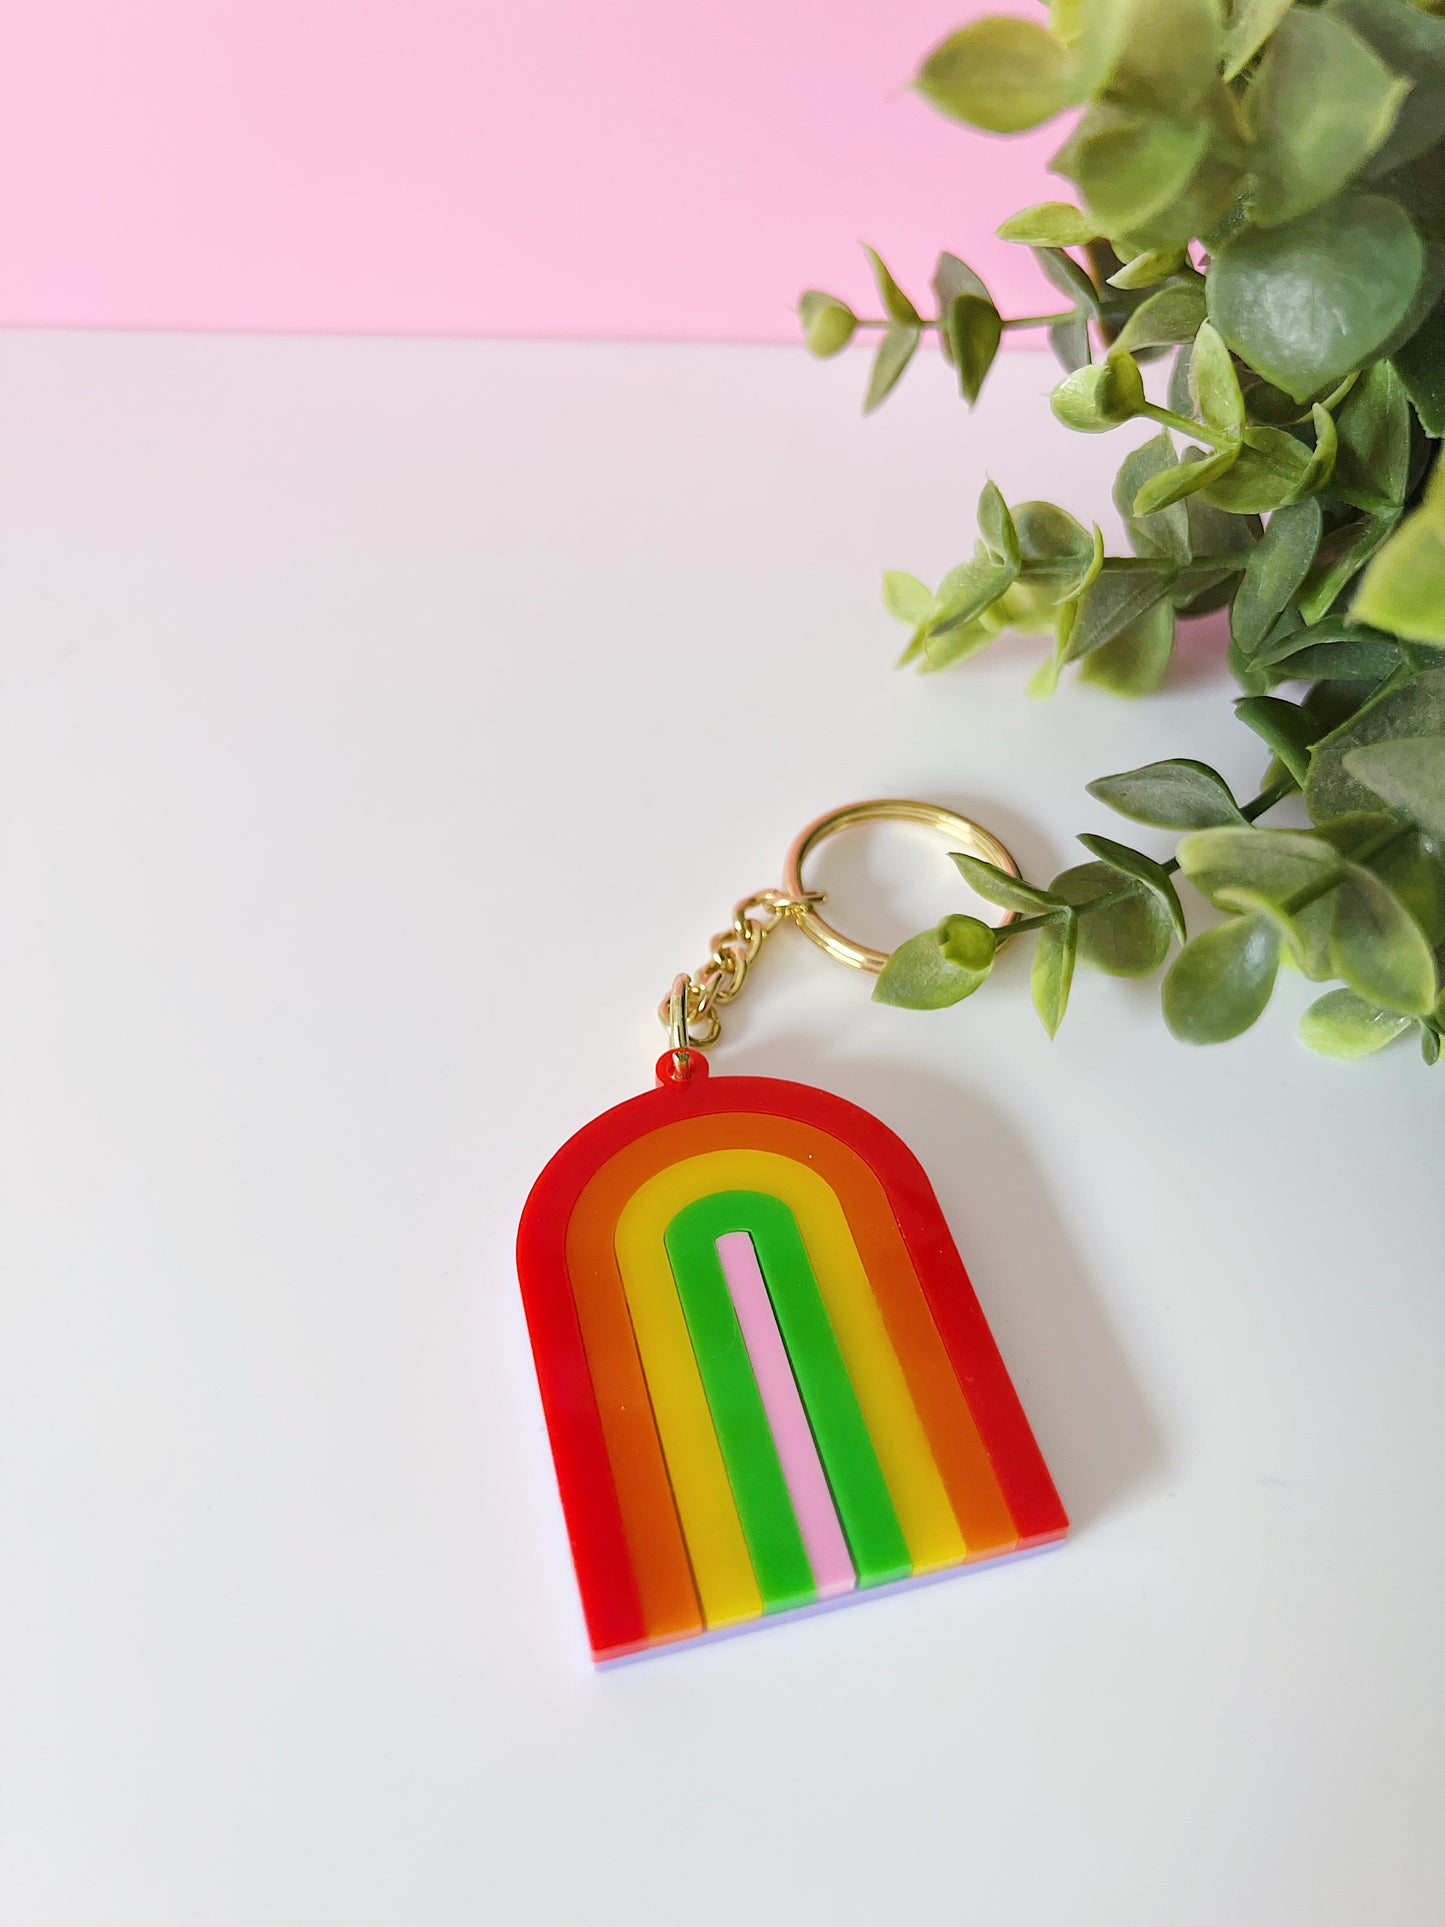 Rainbow Archway Keyring - 3 Colour Options to choose from!